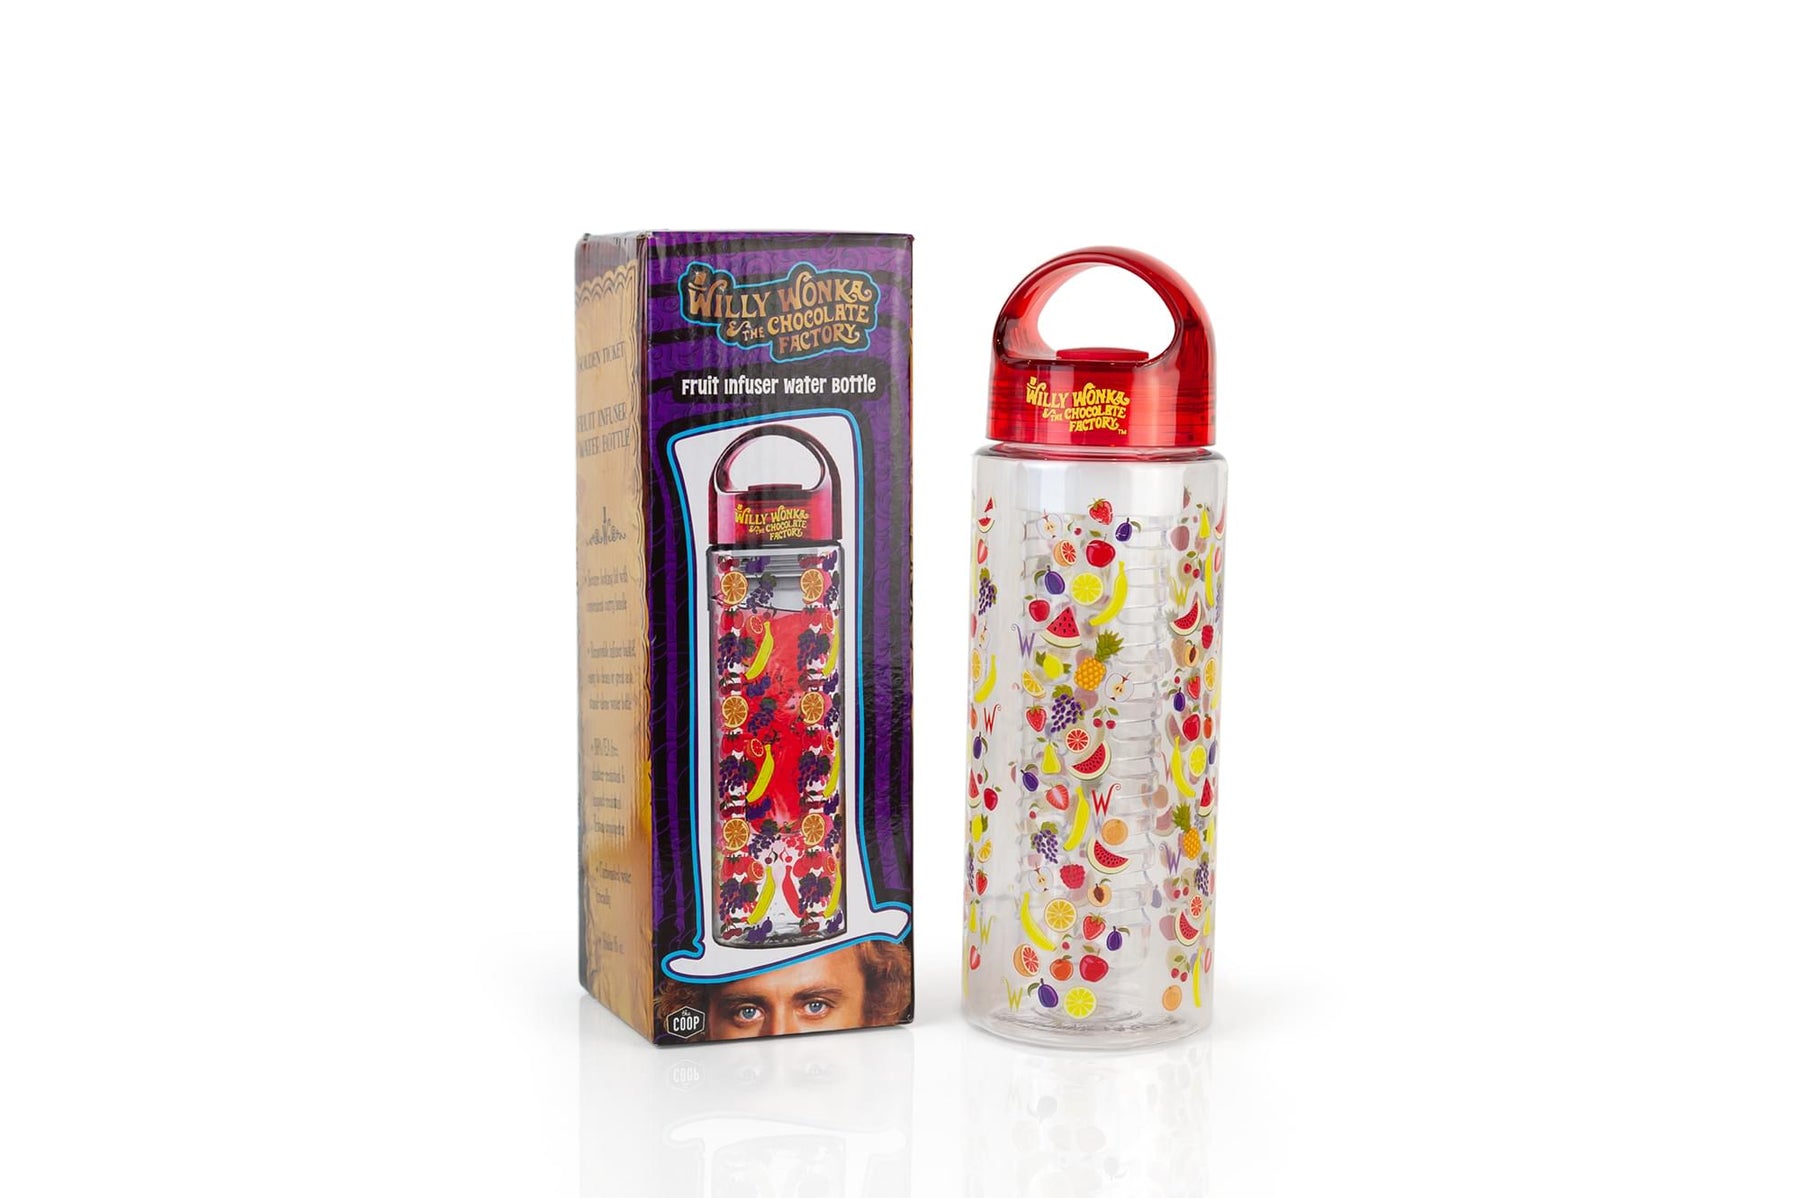 Willy Wonka Fruit Infuser Water Bottle - 16-Ounce